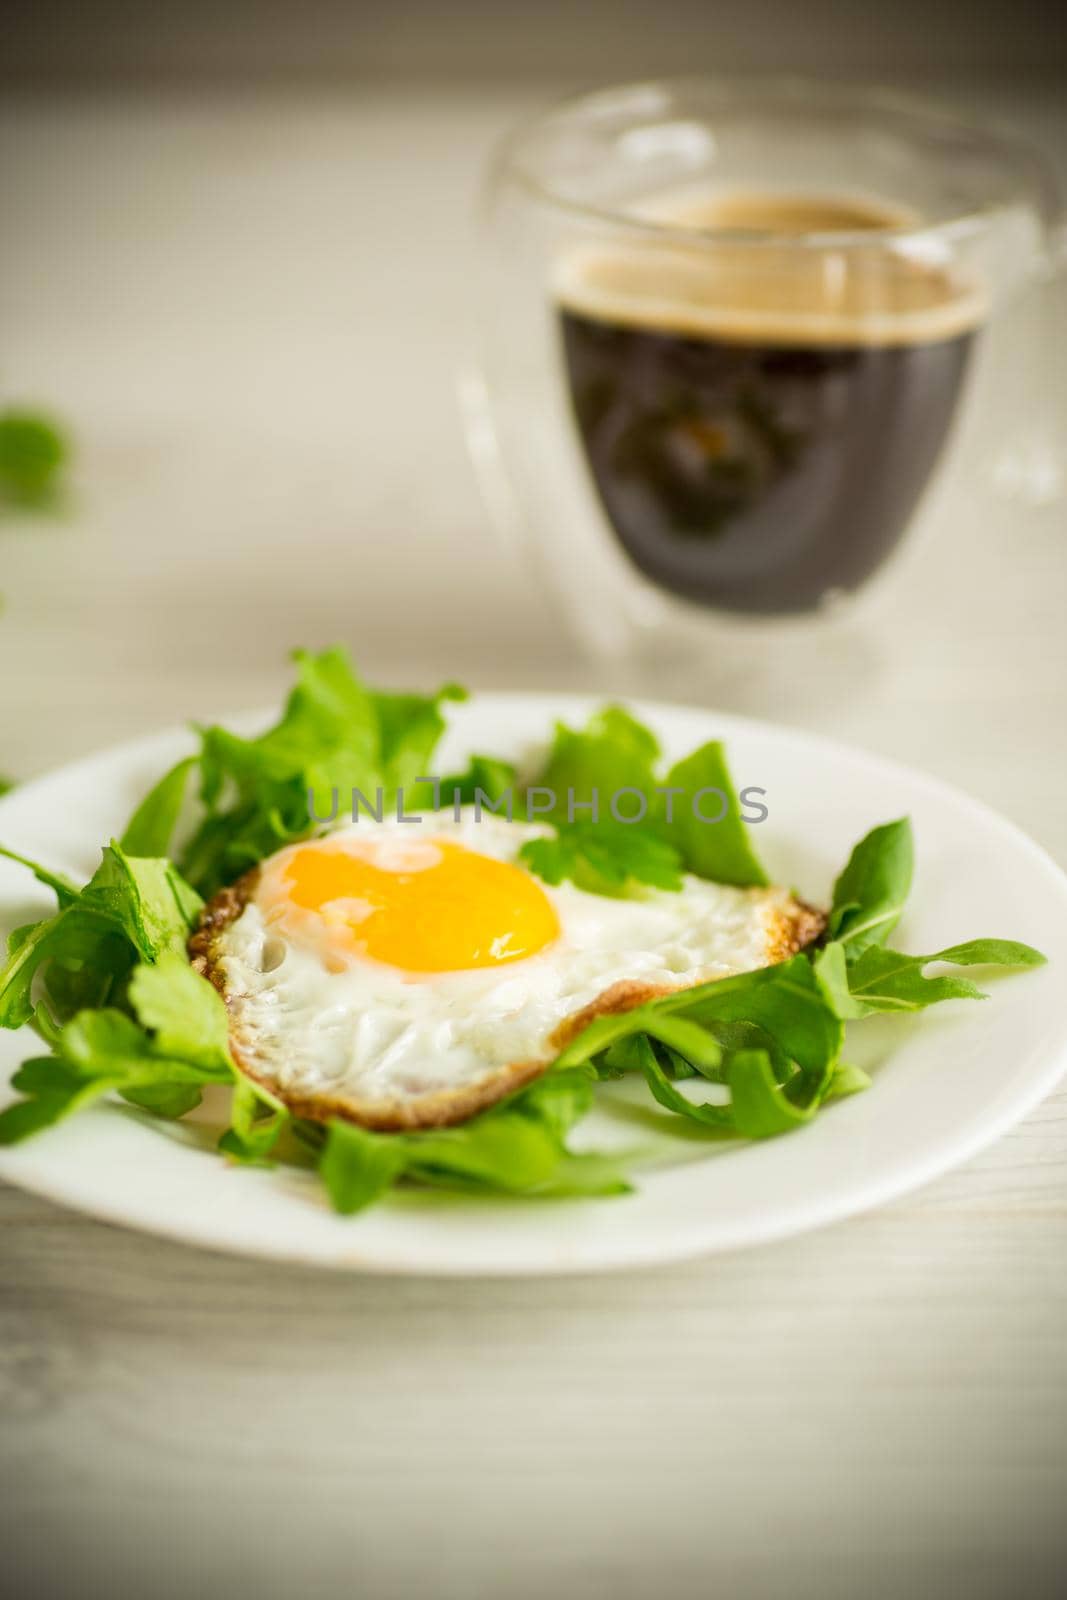 one fried egg with arugula and lettuce in a plate on a wooden table